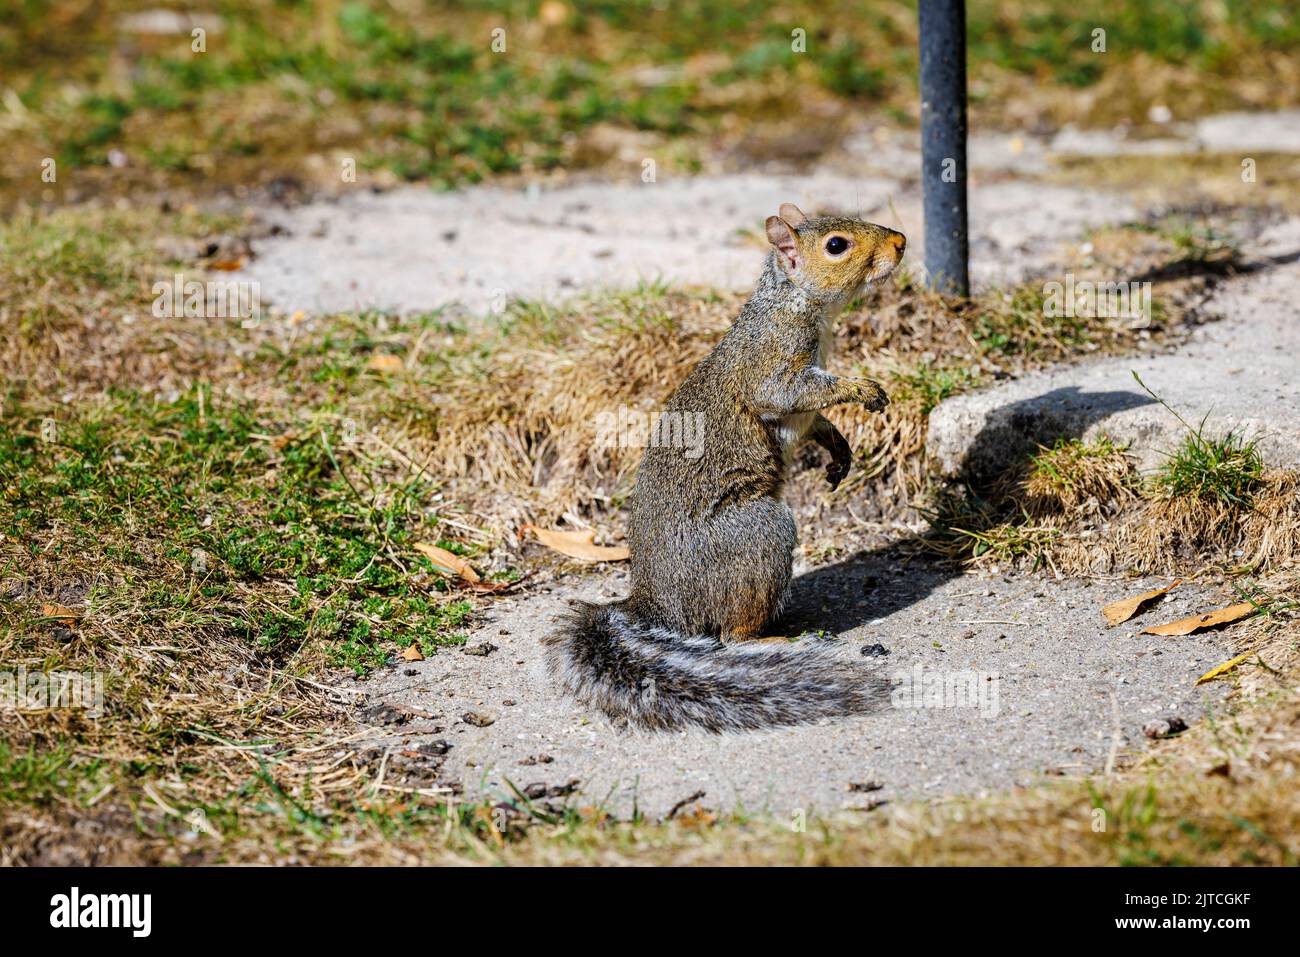 A grey squirrel, Sciurus carolinensis, sitting on its hindquarters on the ground in a garden in Surrey, south-east England, an invasive pest species Stock Photo